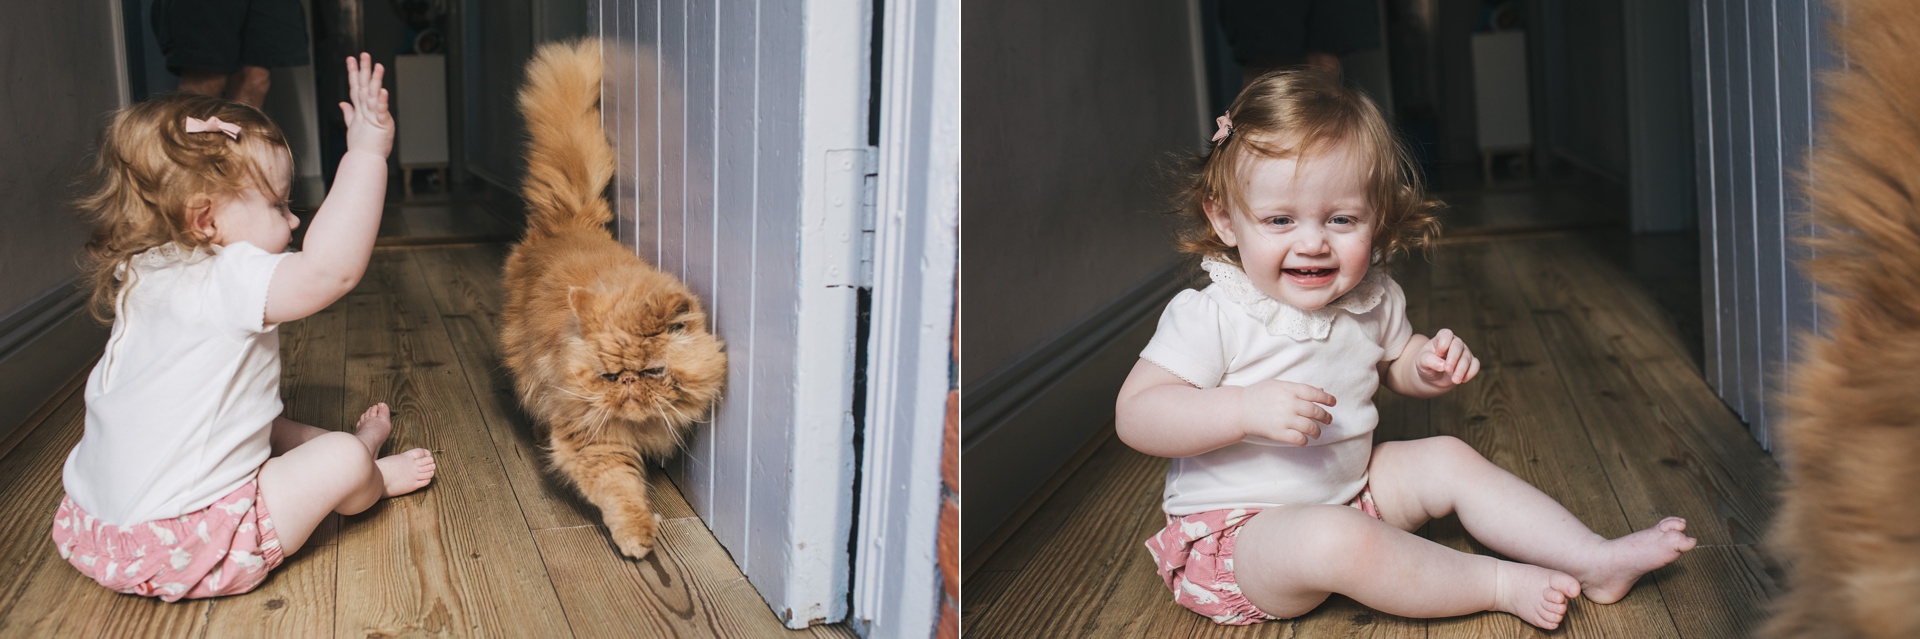 A young girl laughing at a cat